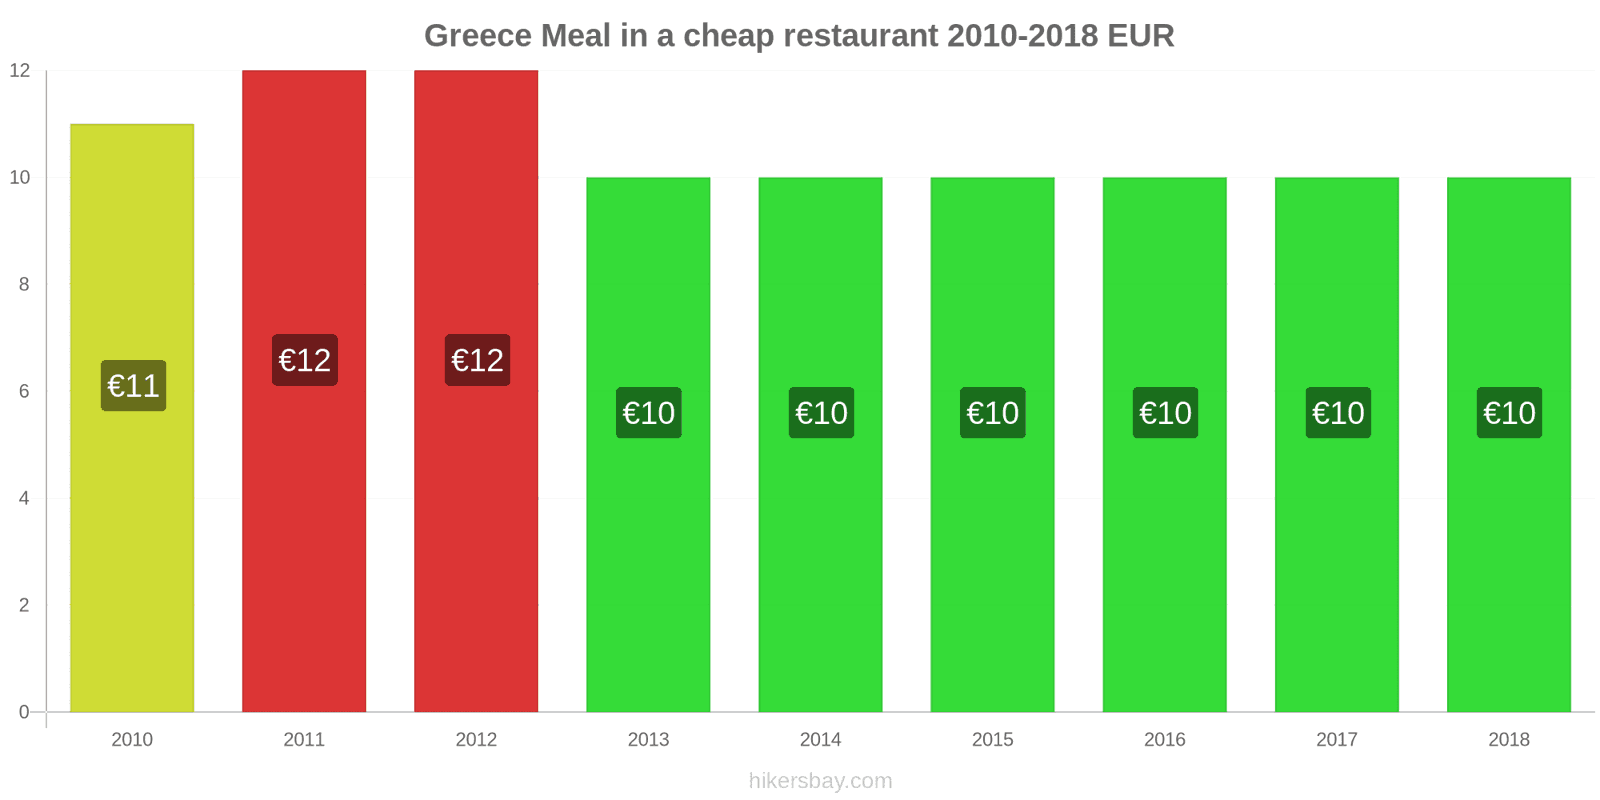 Greece price changes Meal in a cheap restaurant hikersbay.com